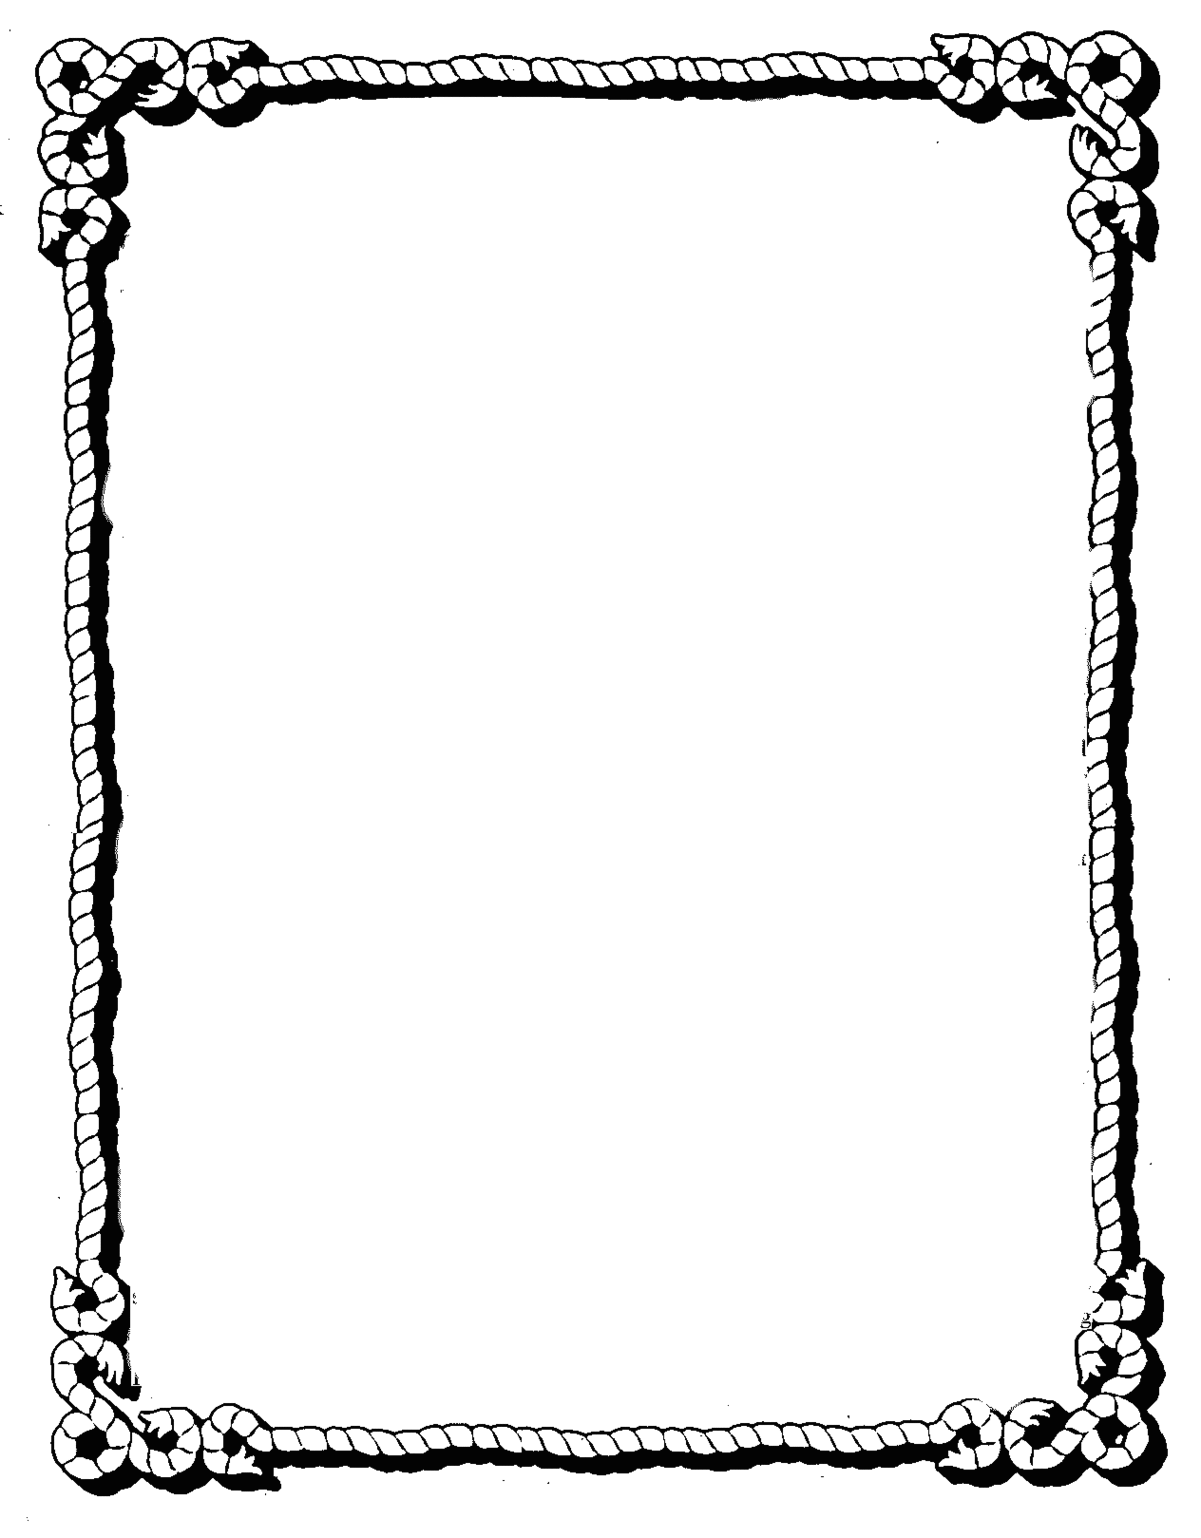 simple-page-border-designs-and-frames-clipart-free-to-use-clip